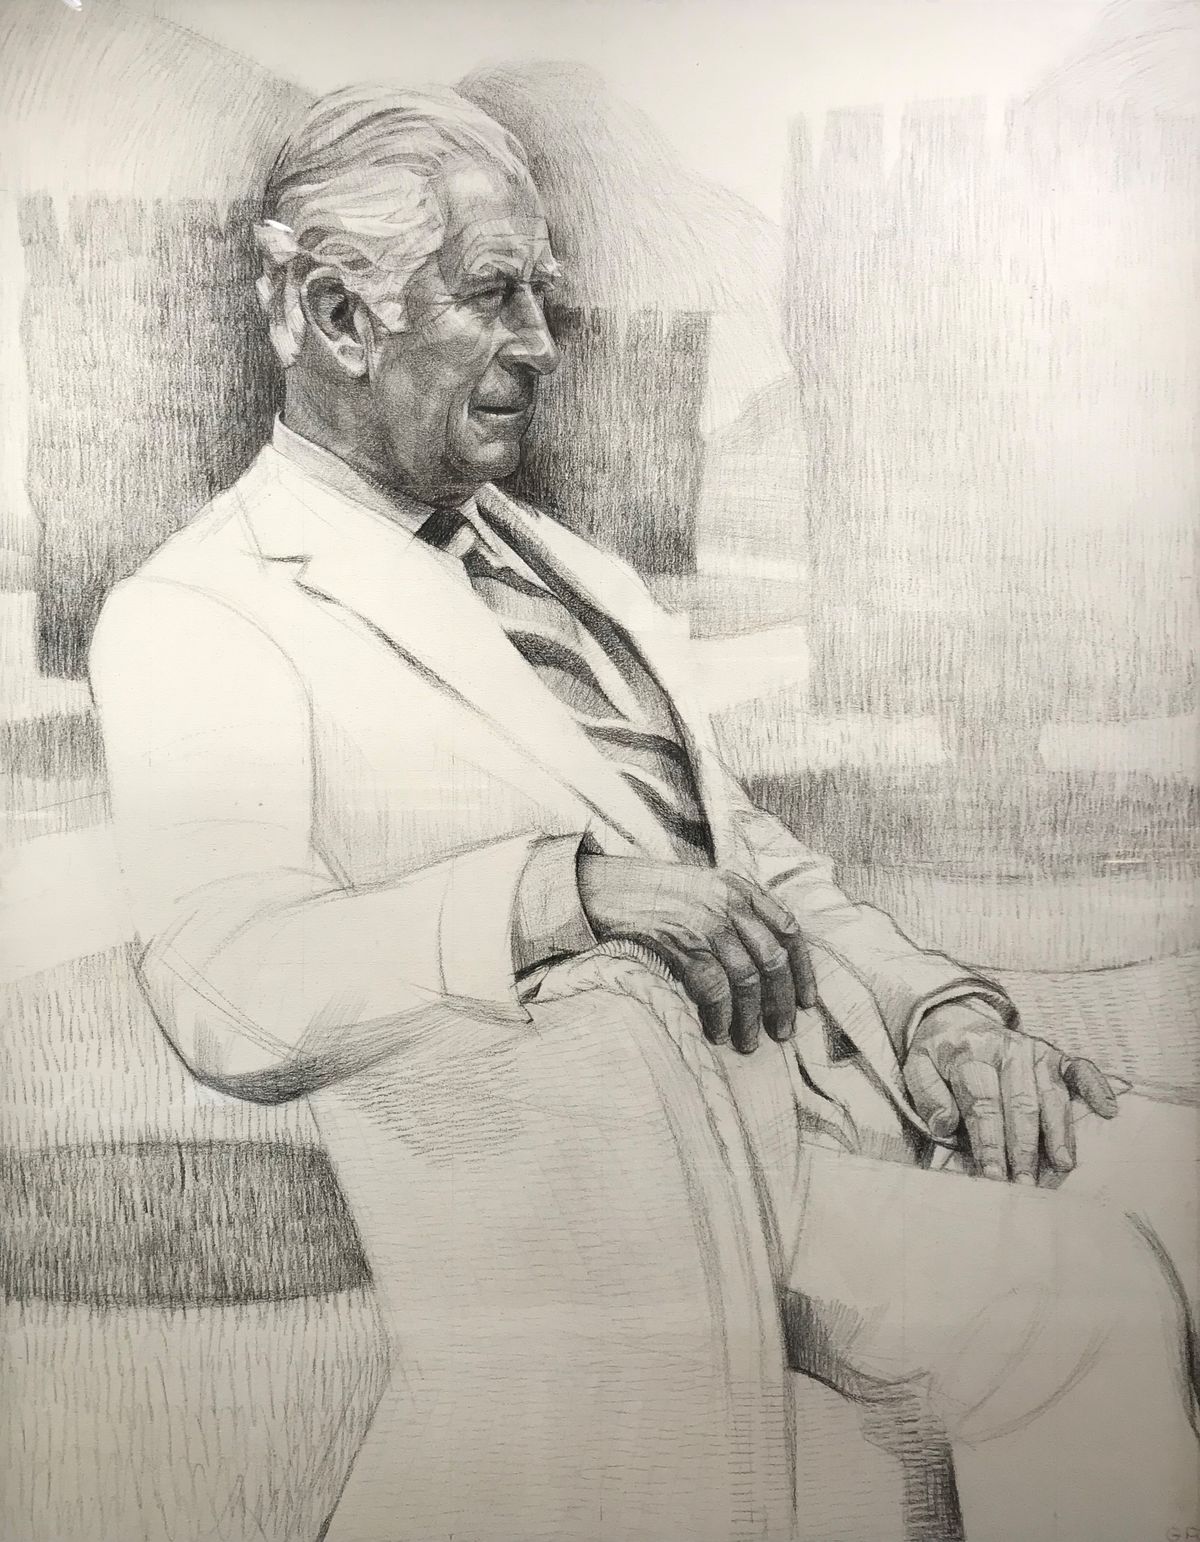 Reid Gareth Working Drawing For The Portrait Of Hrh The Prince Of Wales Commissioned By The Historic Royal Palaces Charity 54X42Ins Pencil On Canvas 2018 19